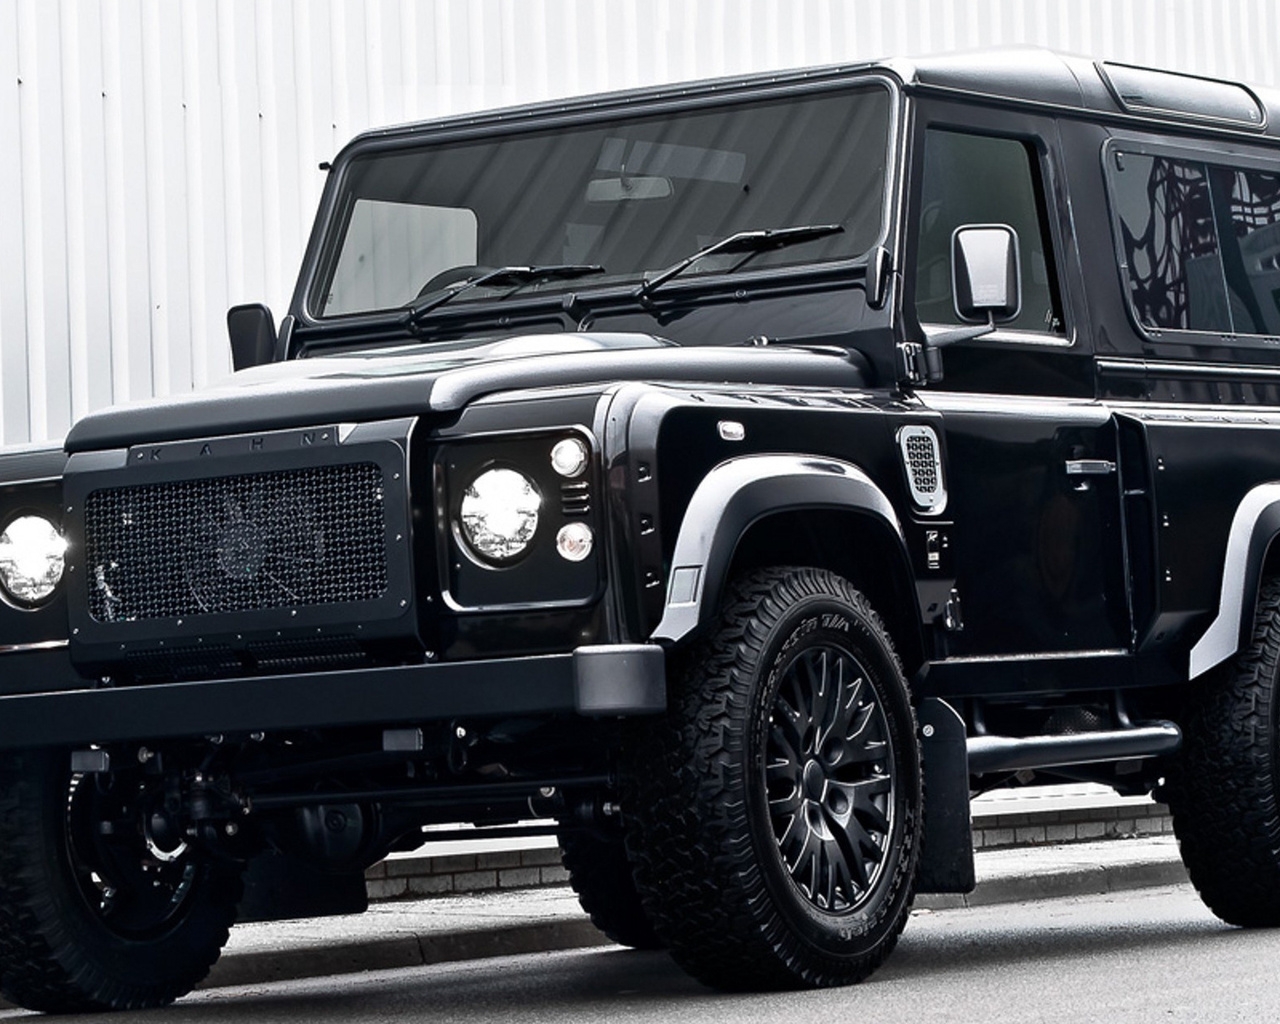 Land Rover Defender Military Edition Kahn Edition for 1280 x 1024 resolution